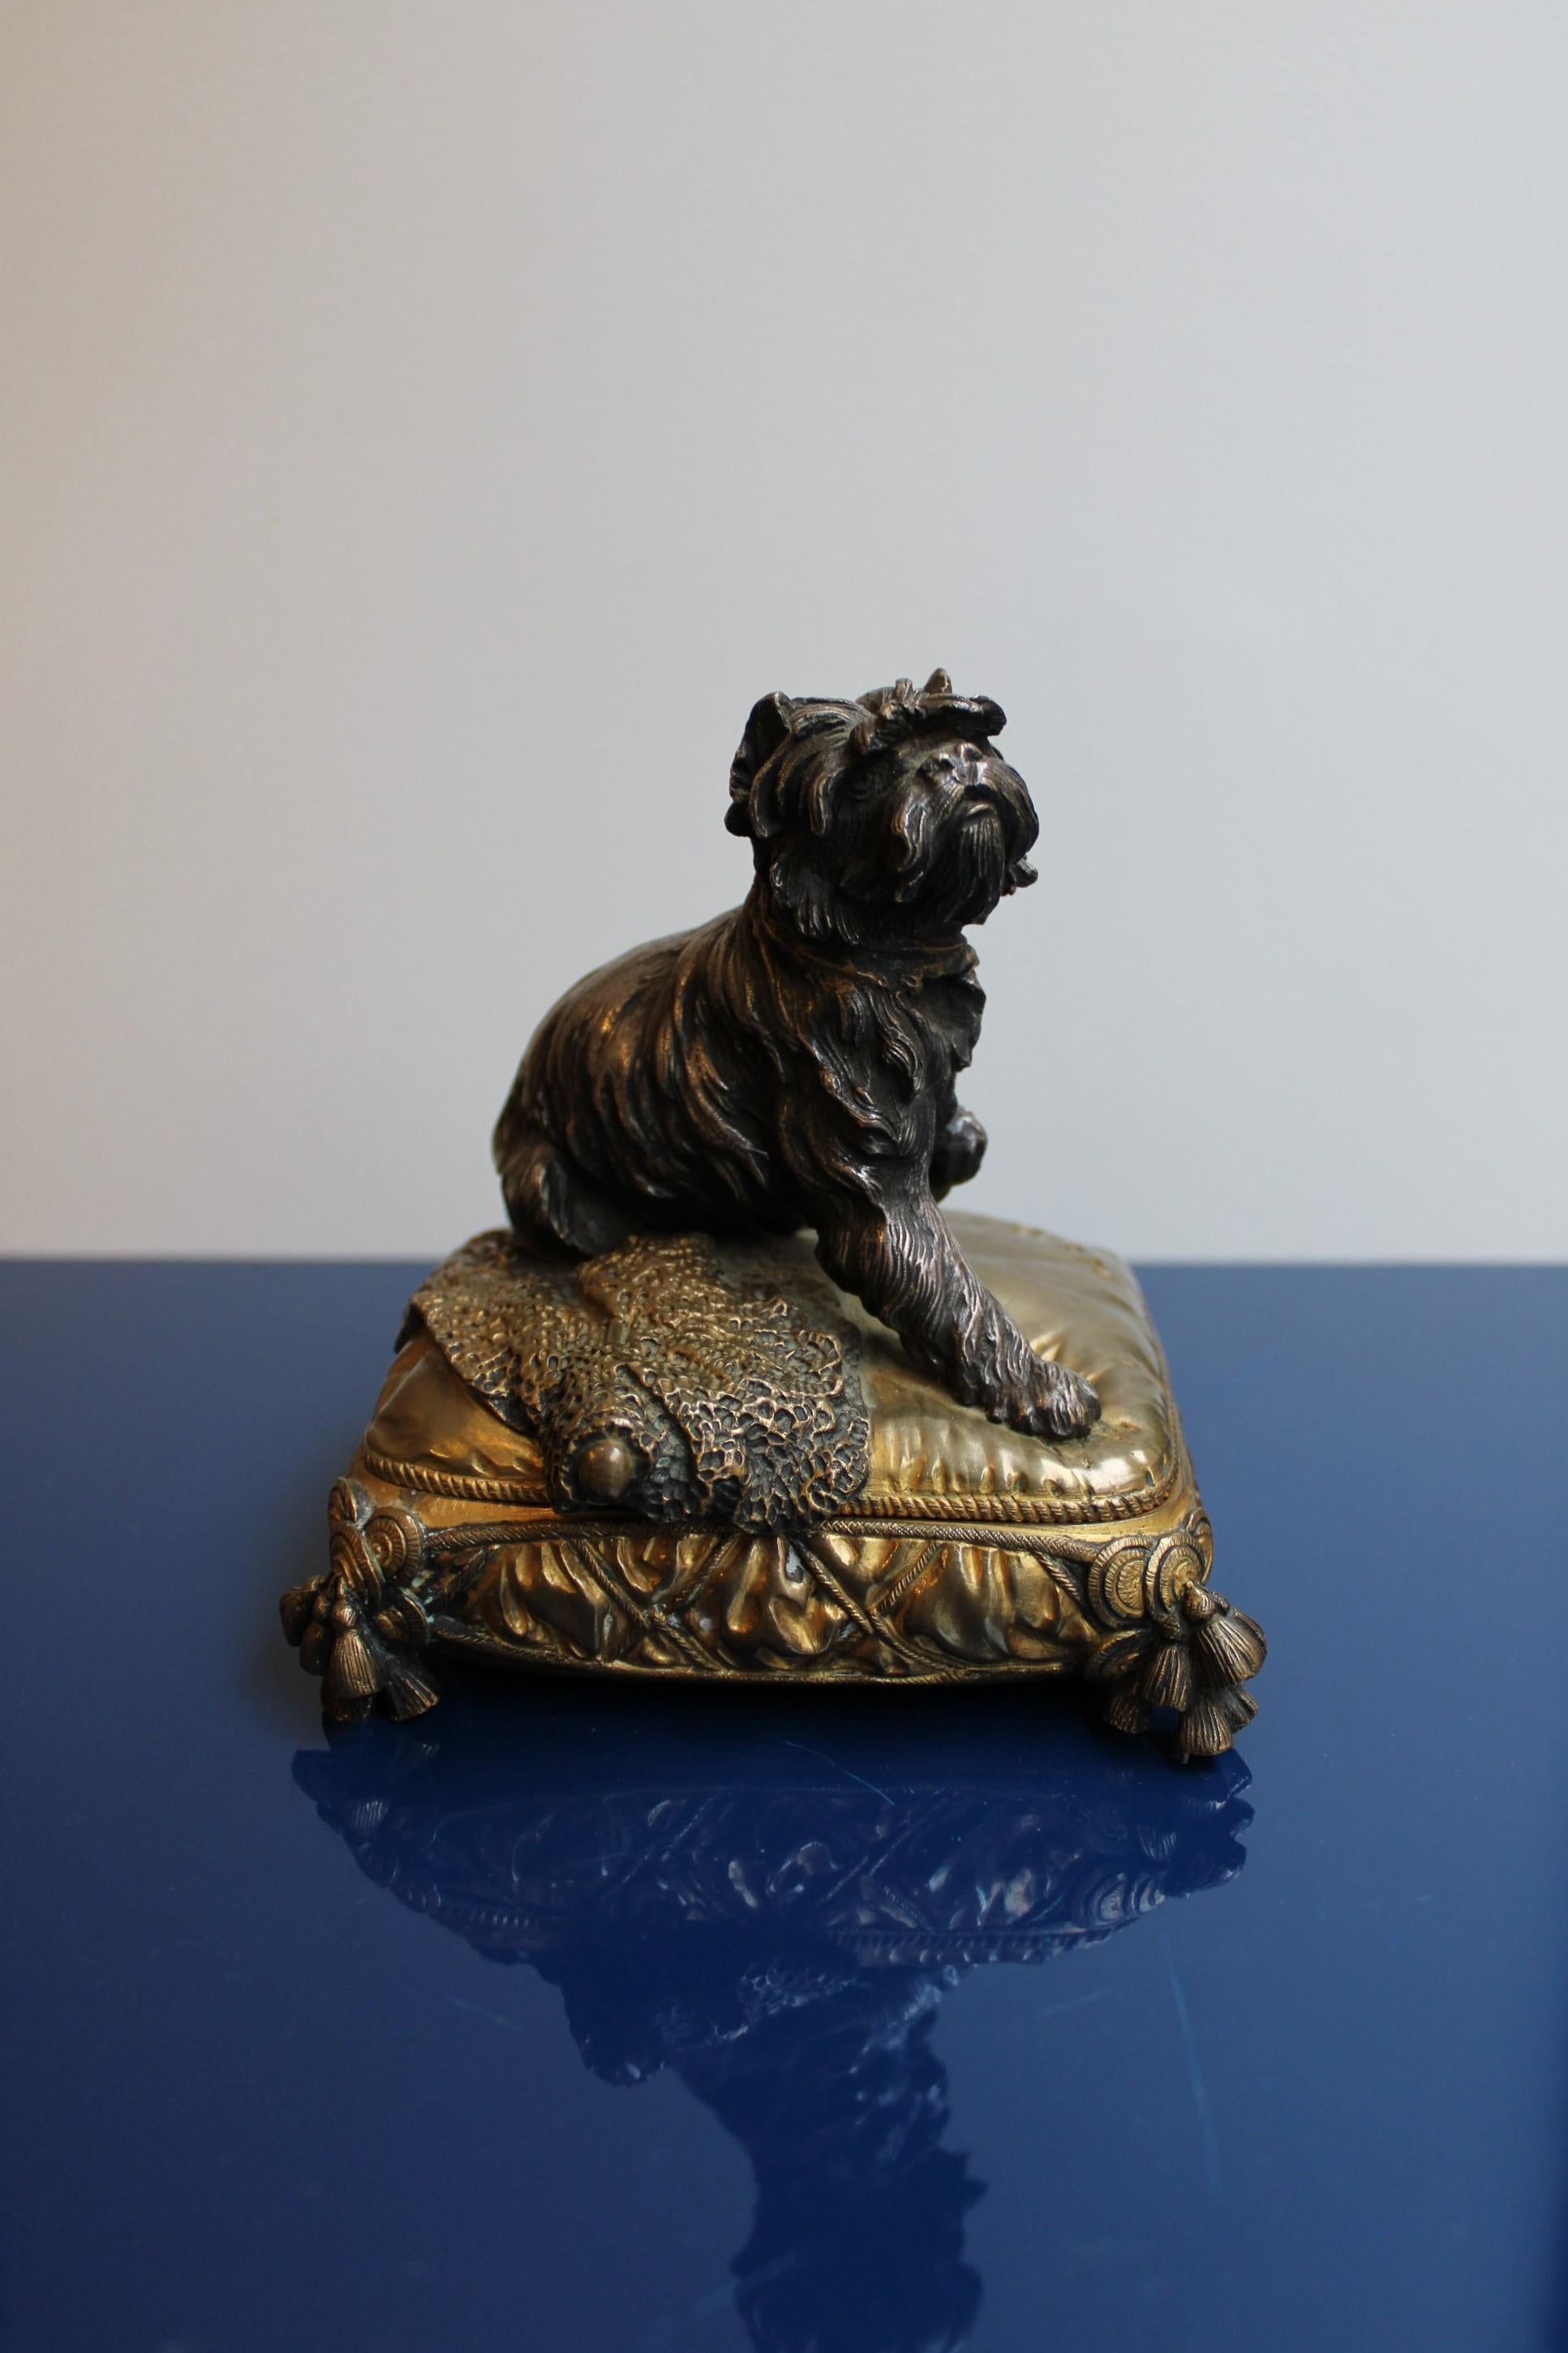 Animal bronze, dog sitting on a pillow.
Box with lid, by the French sculptor Prosper Lecourtier. 
Signed P. Lecourtier.